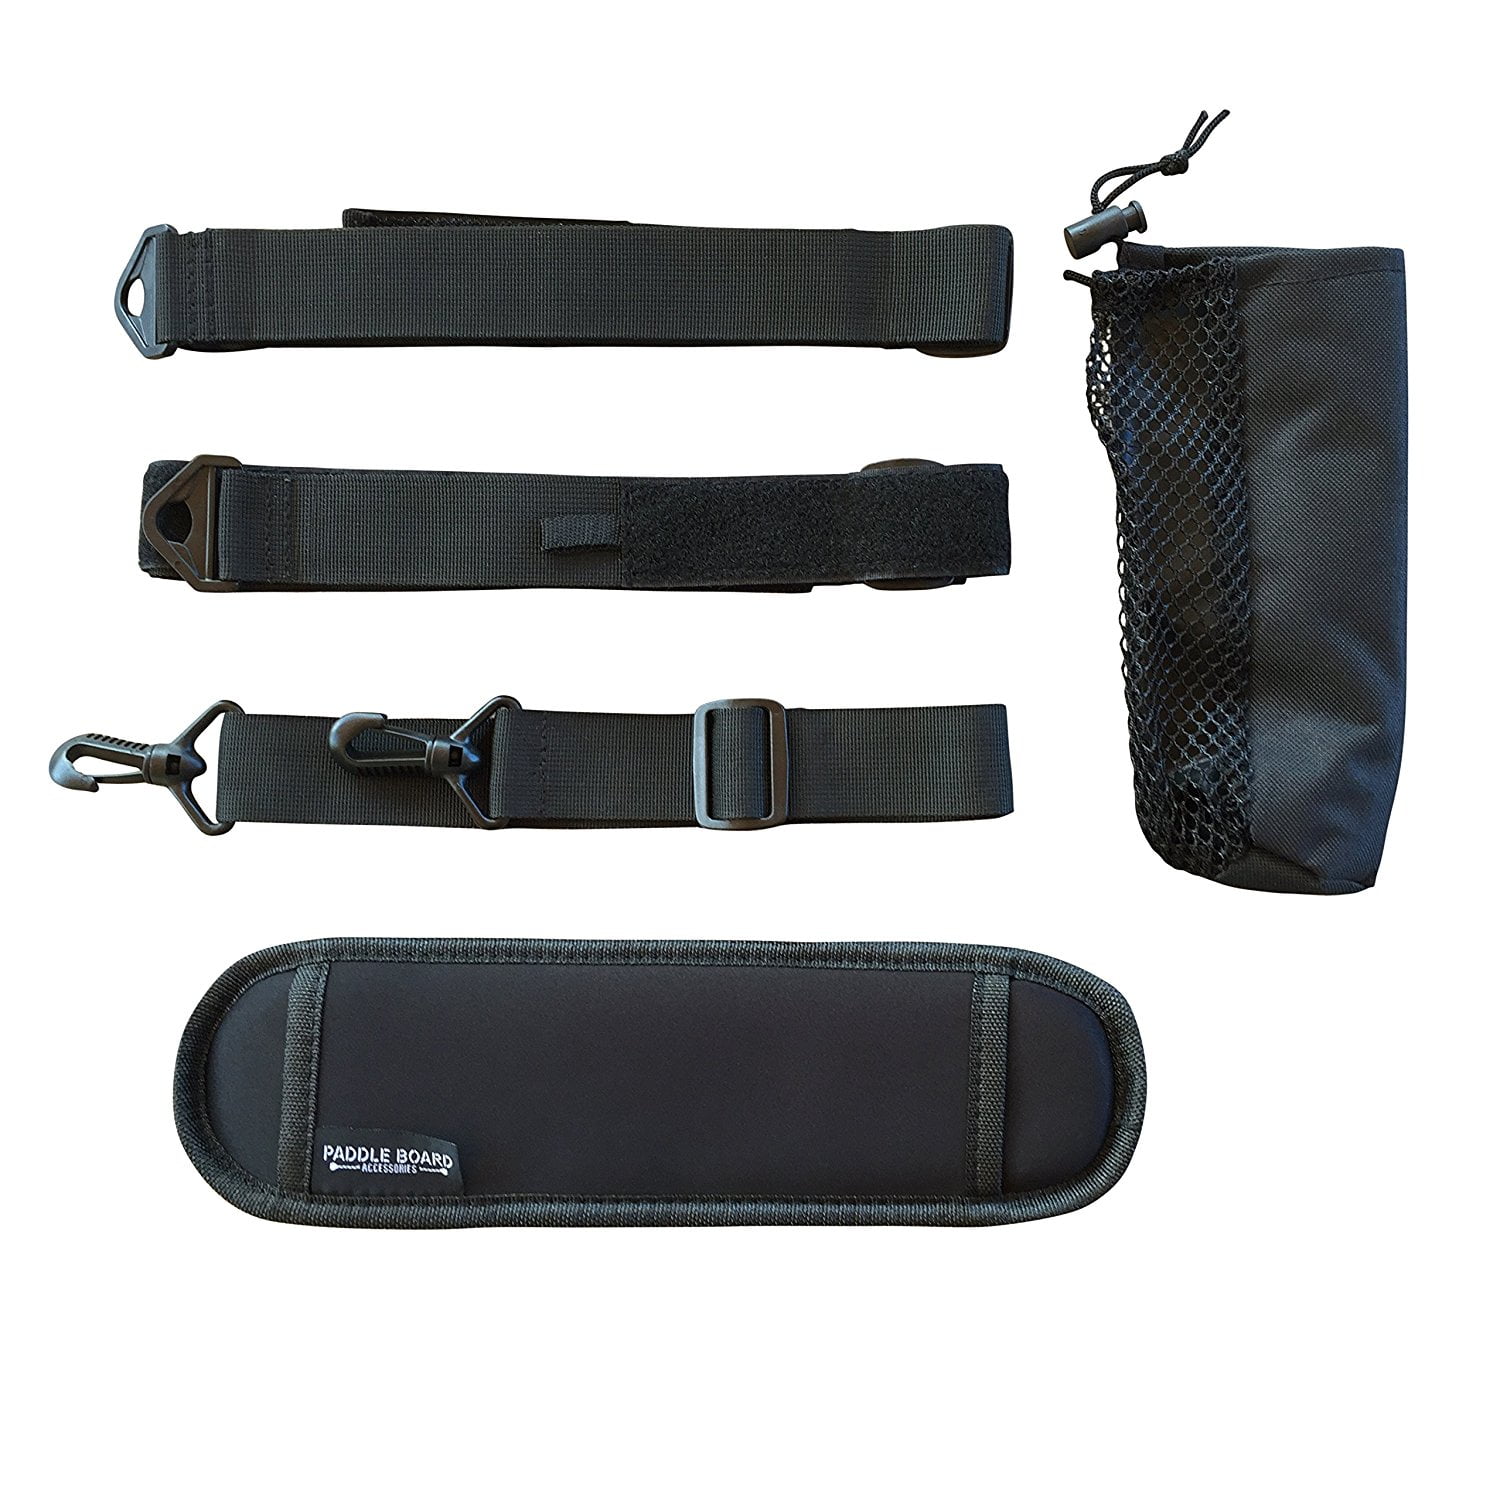 Paddle Board Carrying Strap By Paddle Board Accessories Company ...